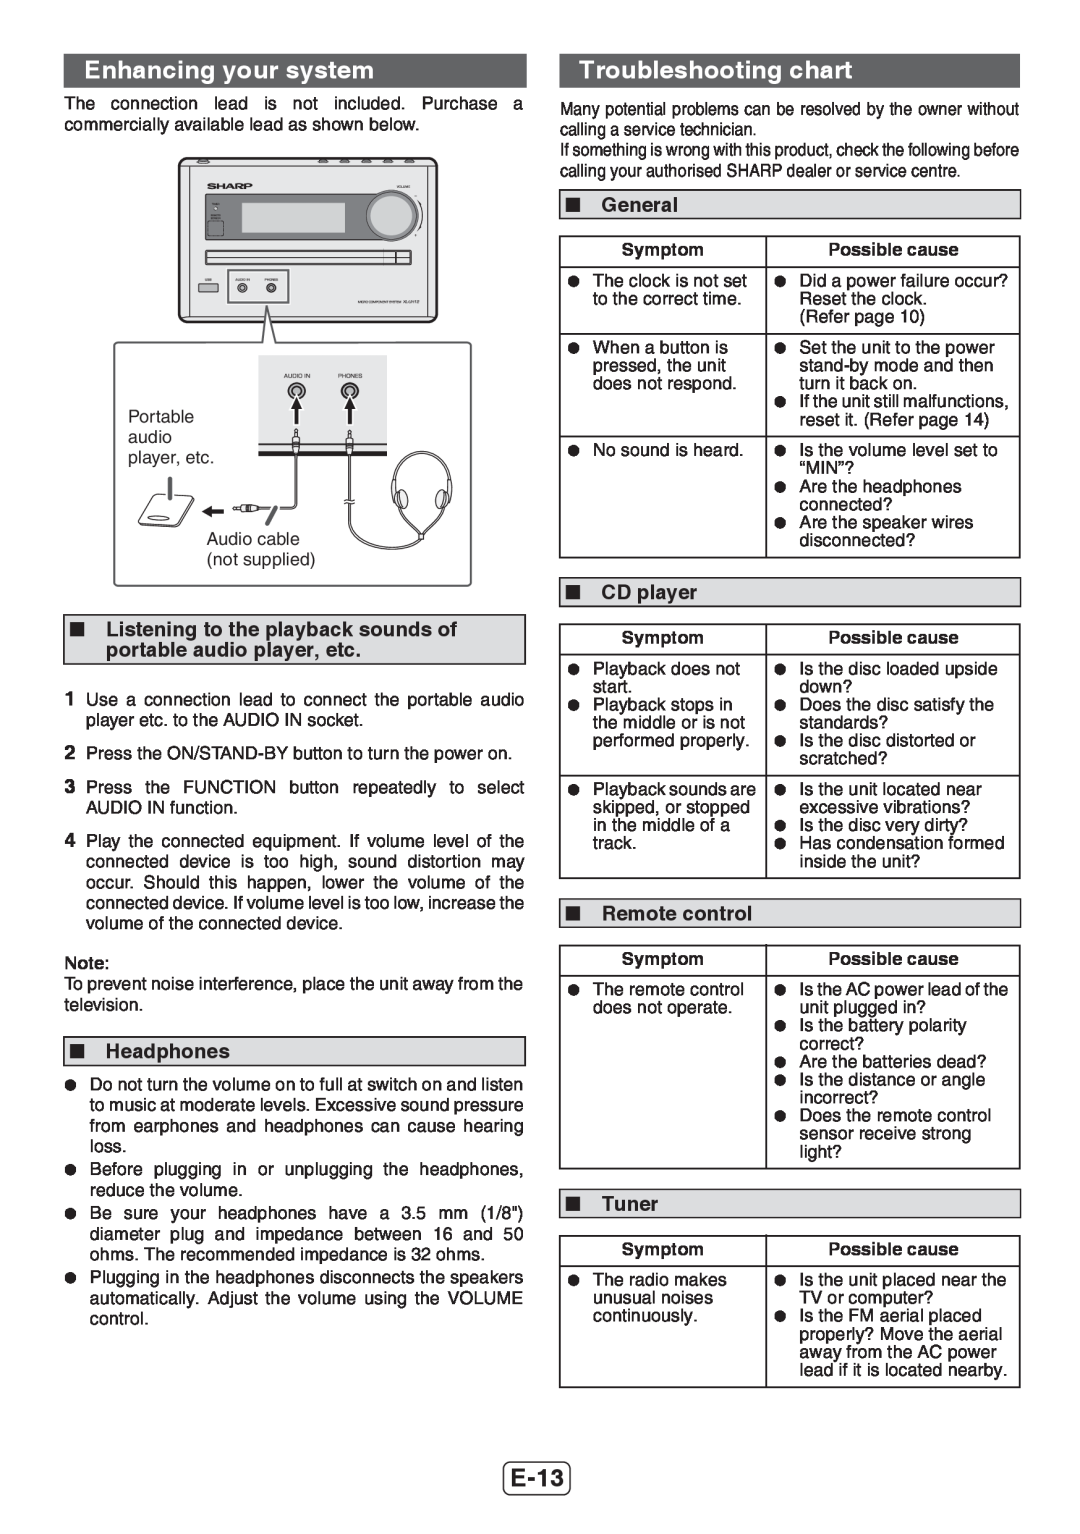 Sharp XL-UH12H Enhancing your system, Troubleshooting chart, E-13, Headphones, CD player, Remote control, Tuner, Symptom 